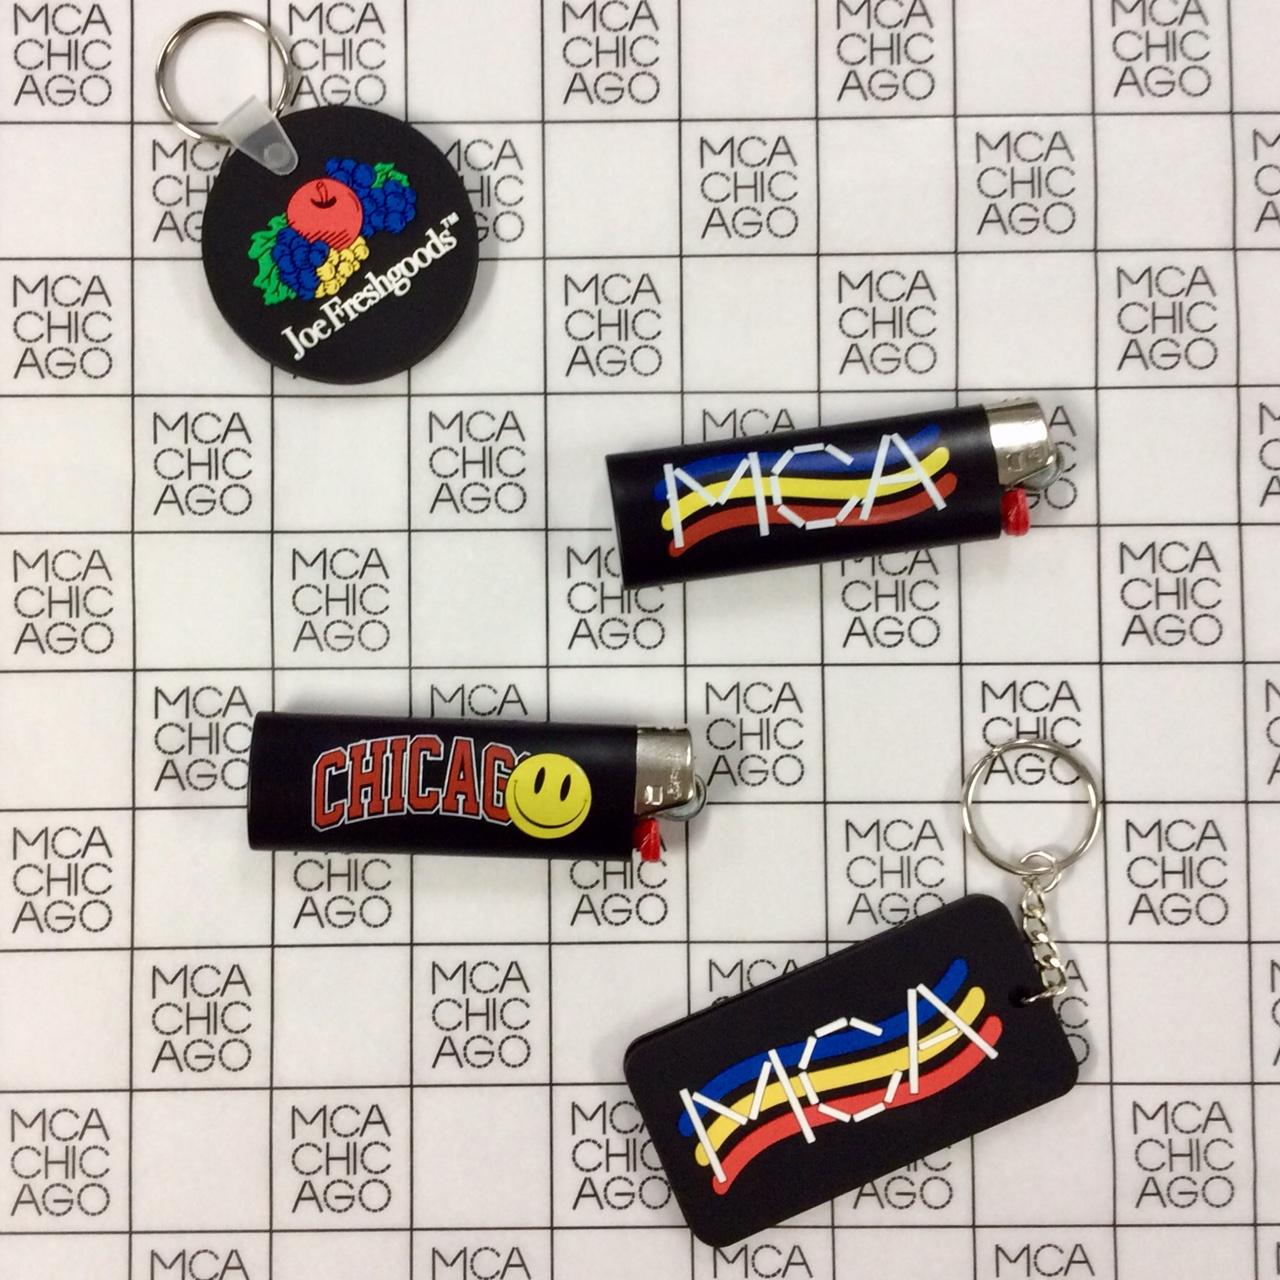 A Joe Freshgoods key chain, MCA-branded lighter and key chain, and a Chicago lighter sit on a black-and-white grid of MCA Chicago logos.